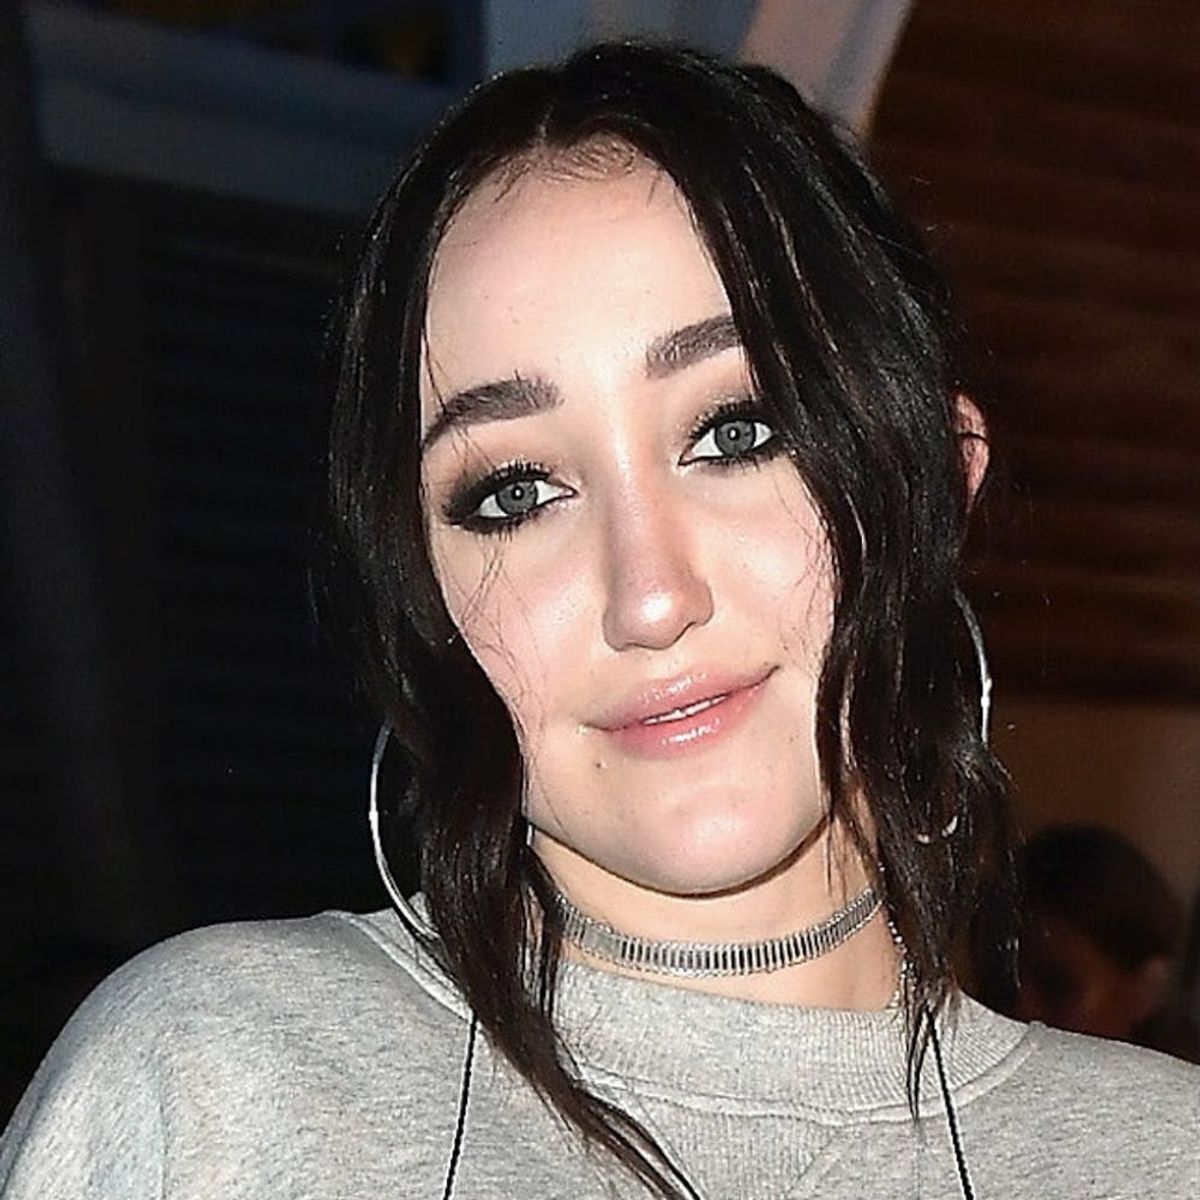 See the Tastefully Spooky Tattoo Noah Cyrus Got With Her BFF